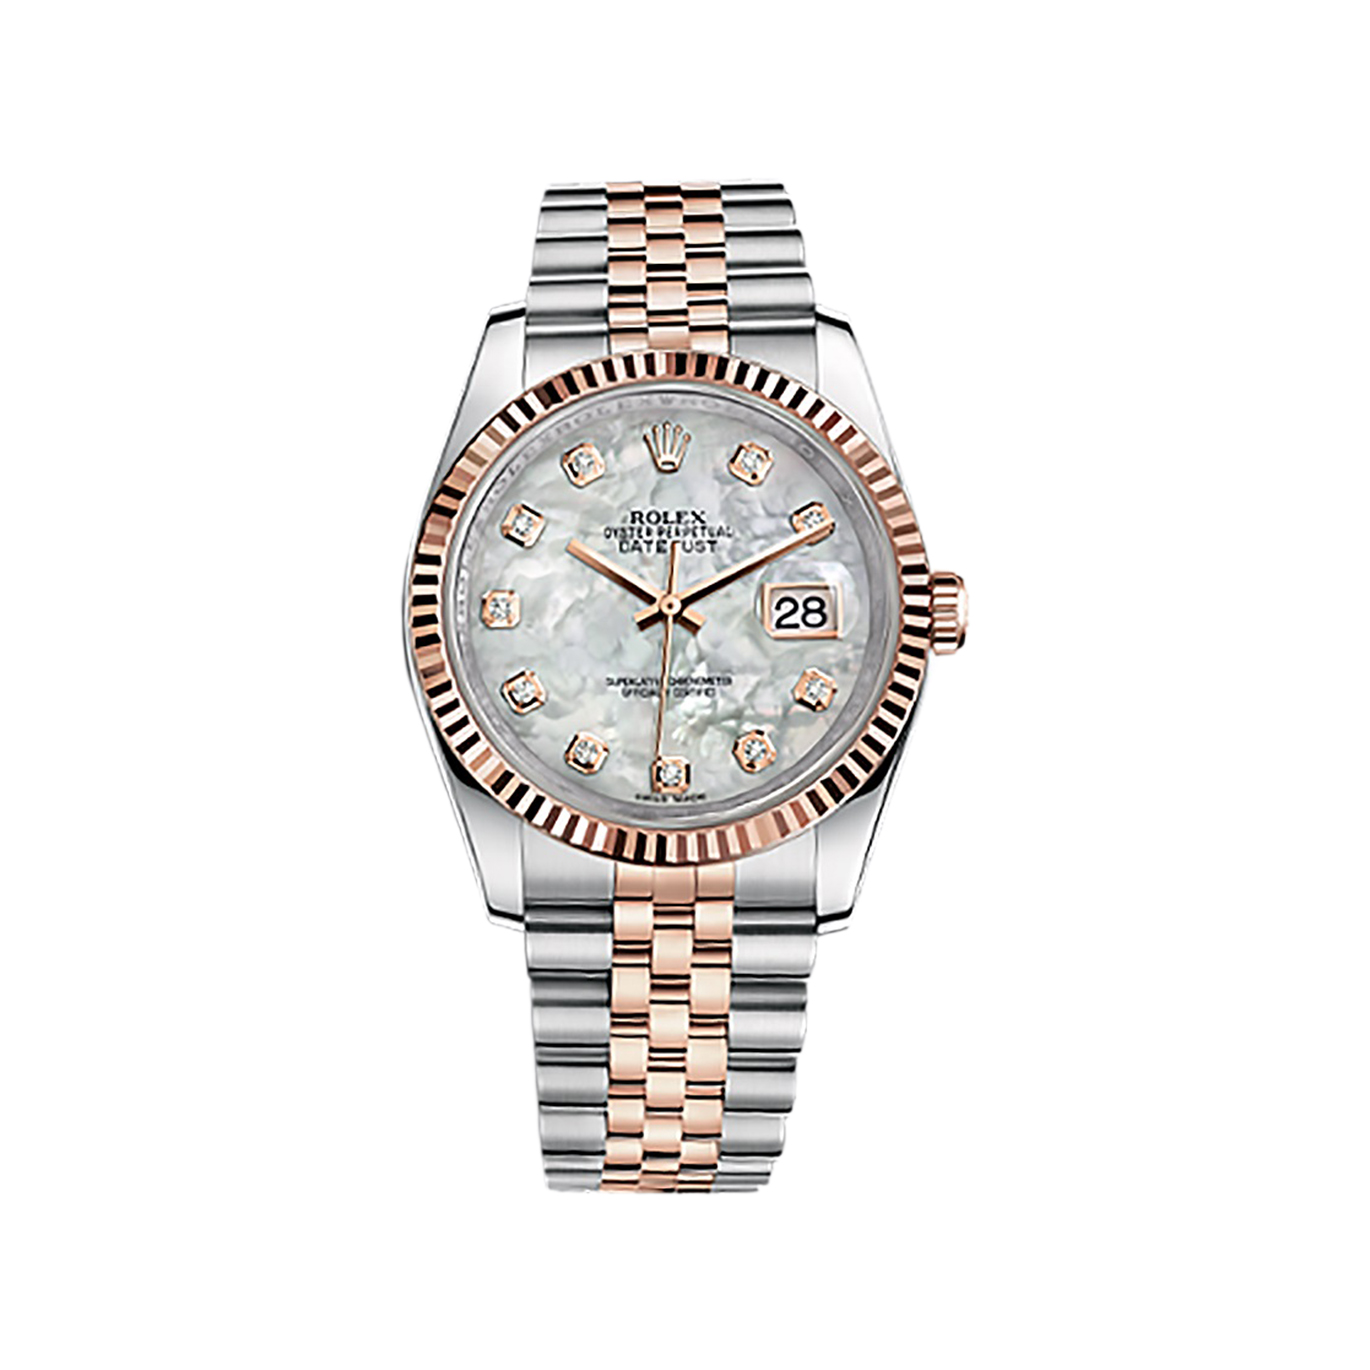 Datejust 36 116231 Rose Gold & Stainless Steel Watch (White Mother-of-Pearl Set with Diamonds) - Click Image to Close